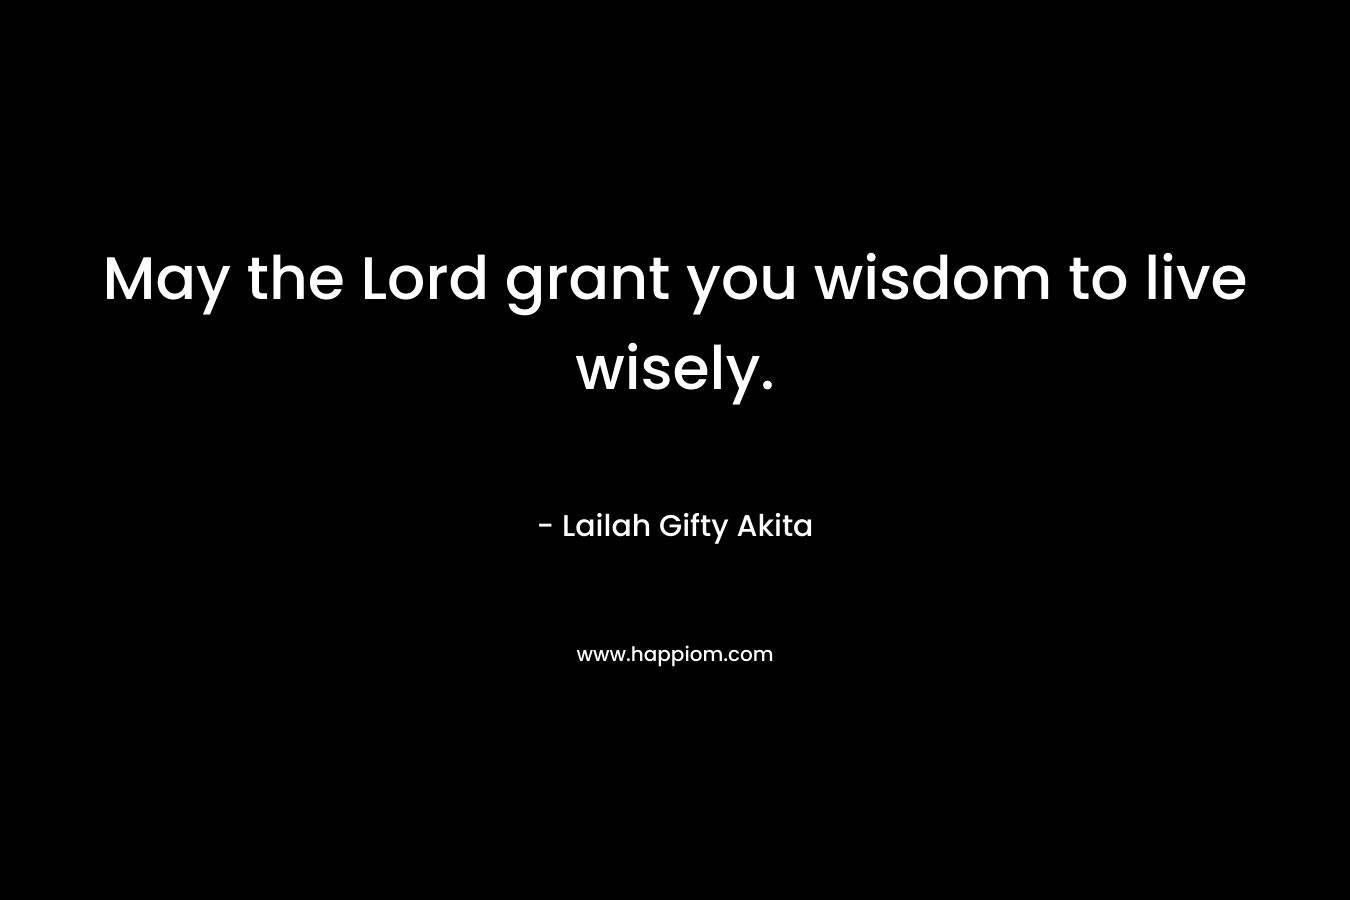 May the Lord grant you wisdom to live wisely.